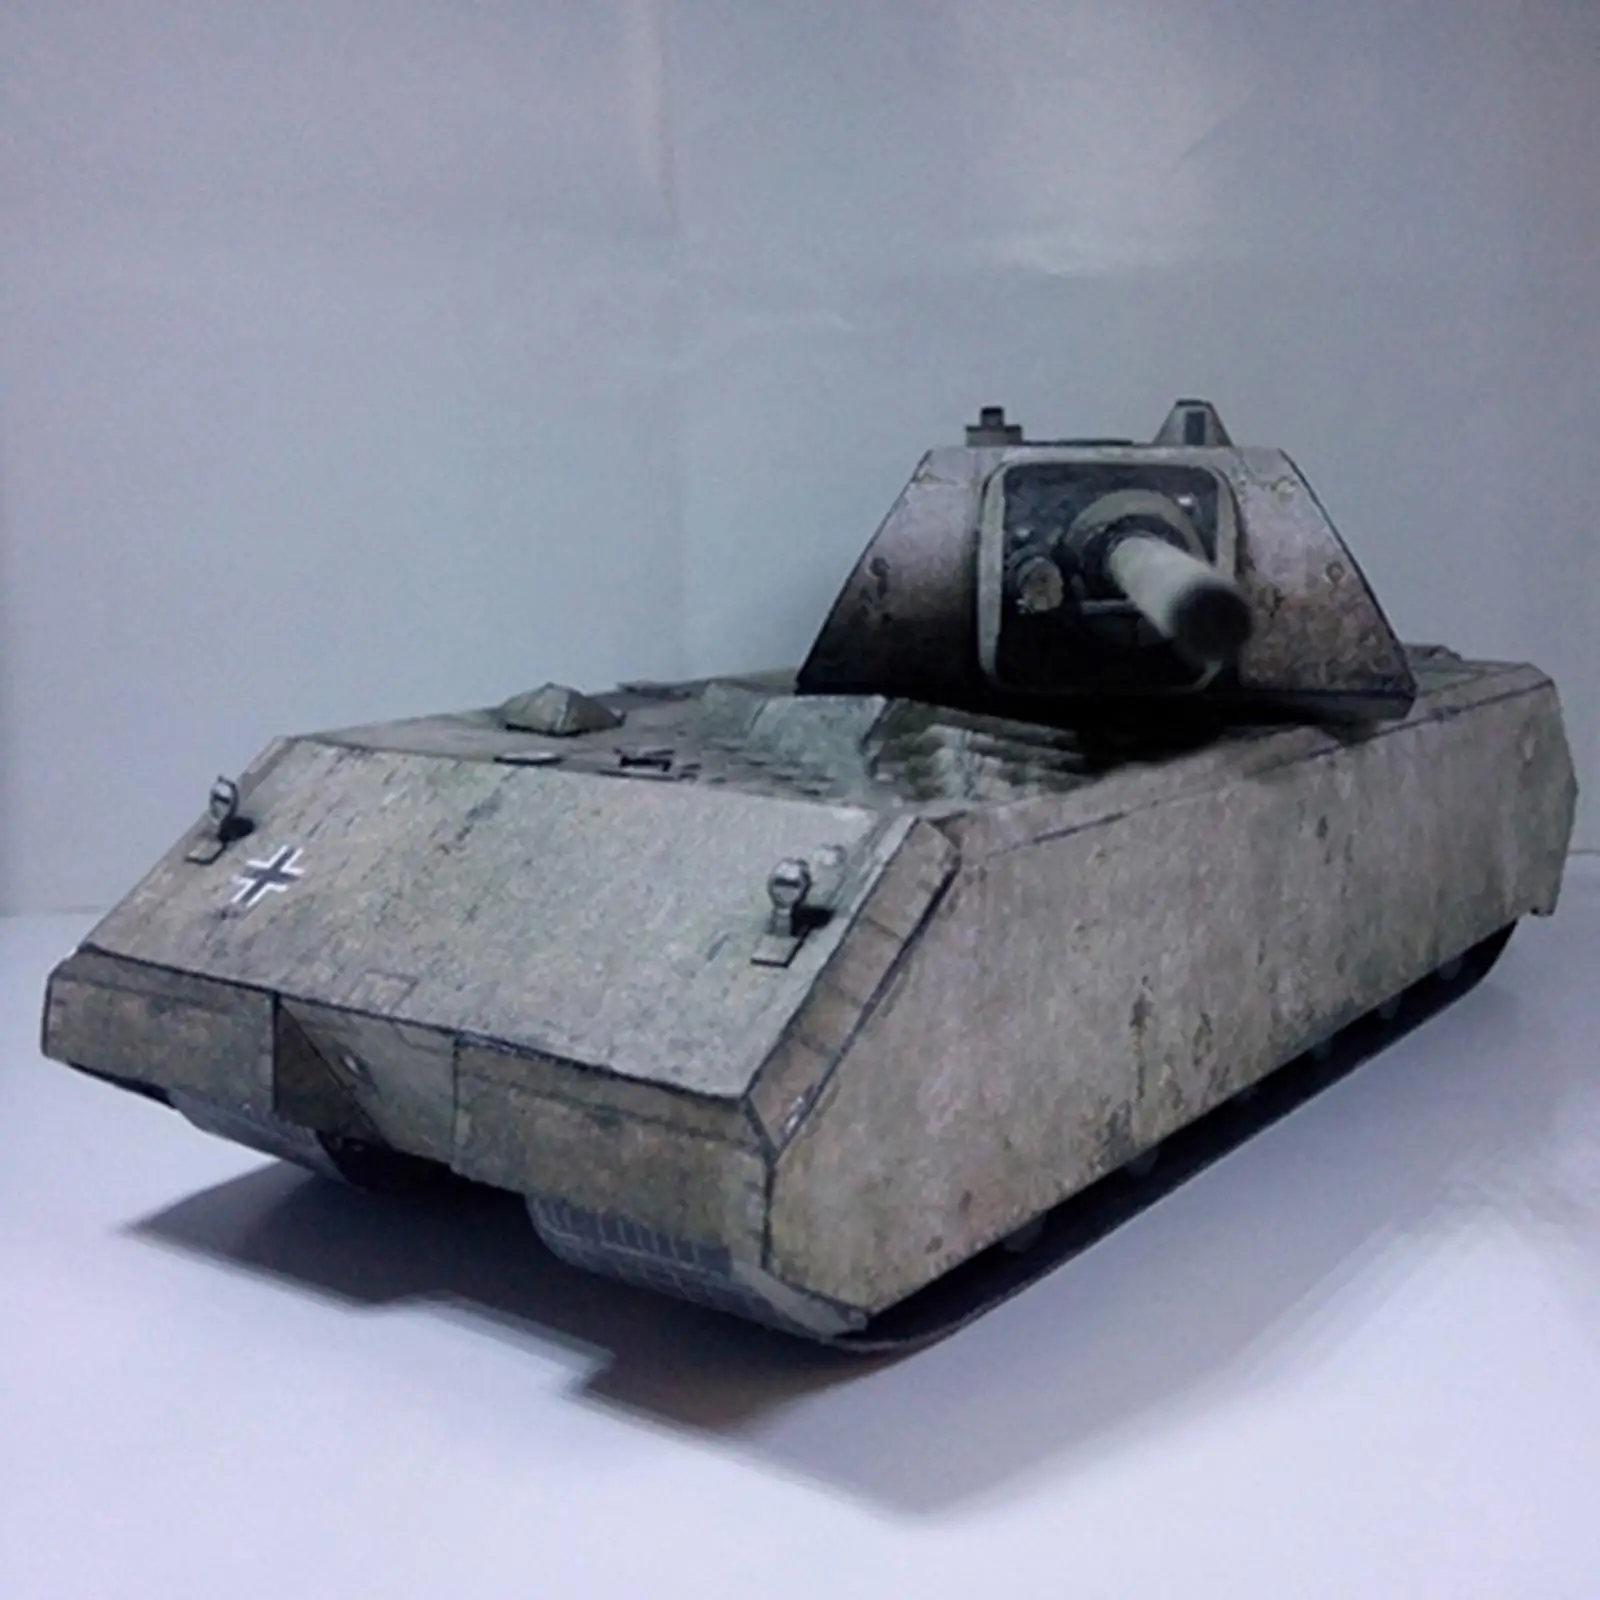 1:35 Armored Tank Model Home Decoration Collectables Educational Handmade Paper Tank Model Kits for Kids Adults Gifts Men Women